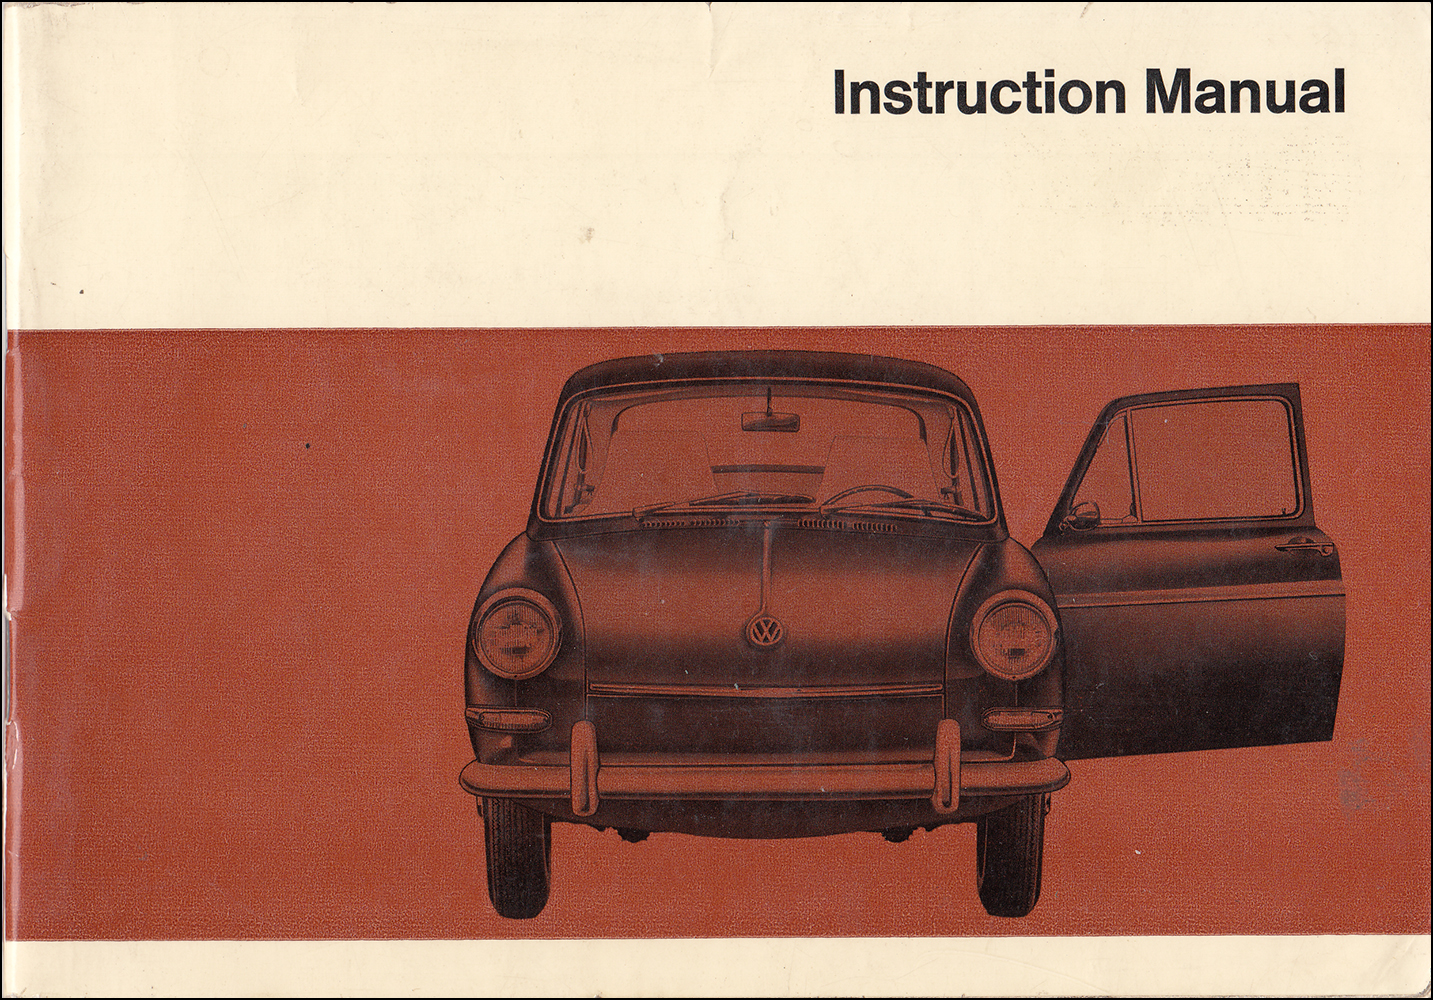 1969 Volkswagen 1500 1600 Owner's Manual Original VW Type 3 Fastback and Variant non-USA